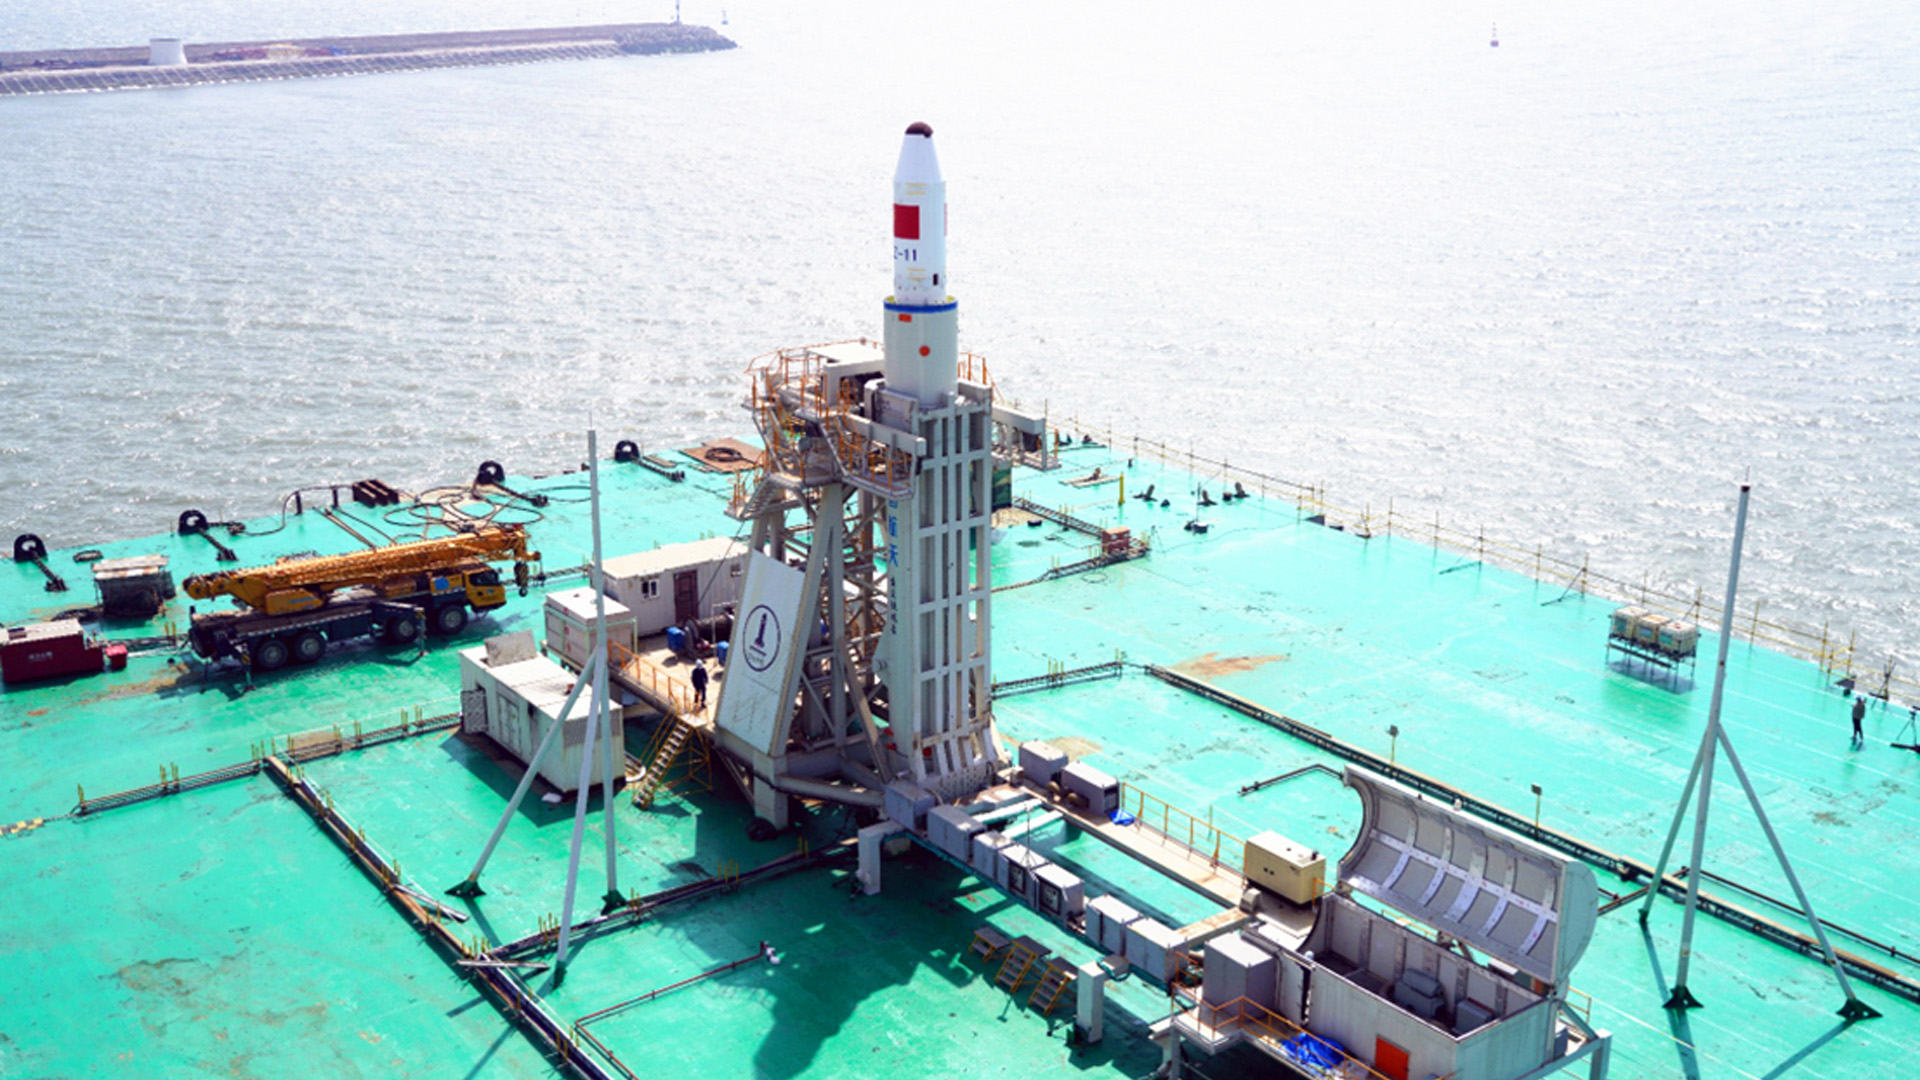 China's Long March 11 rocket stands in launch position on its sea launch platform ahead of a five-satellite launch on April 30, 2022.